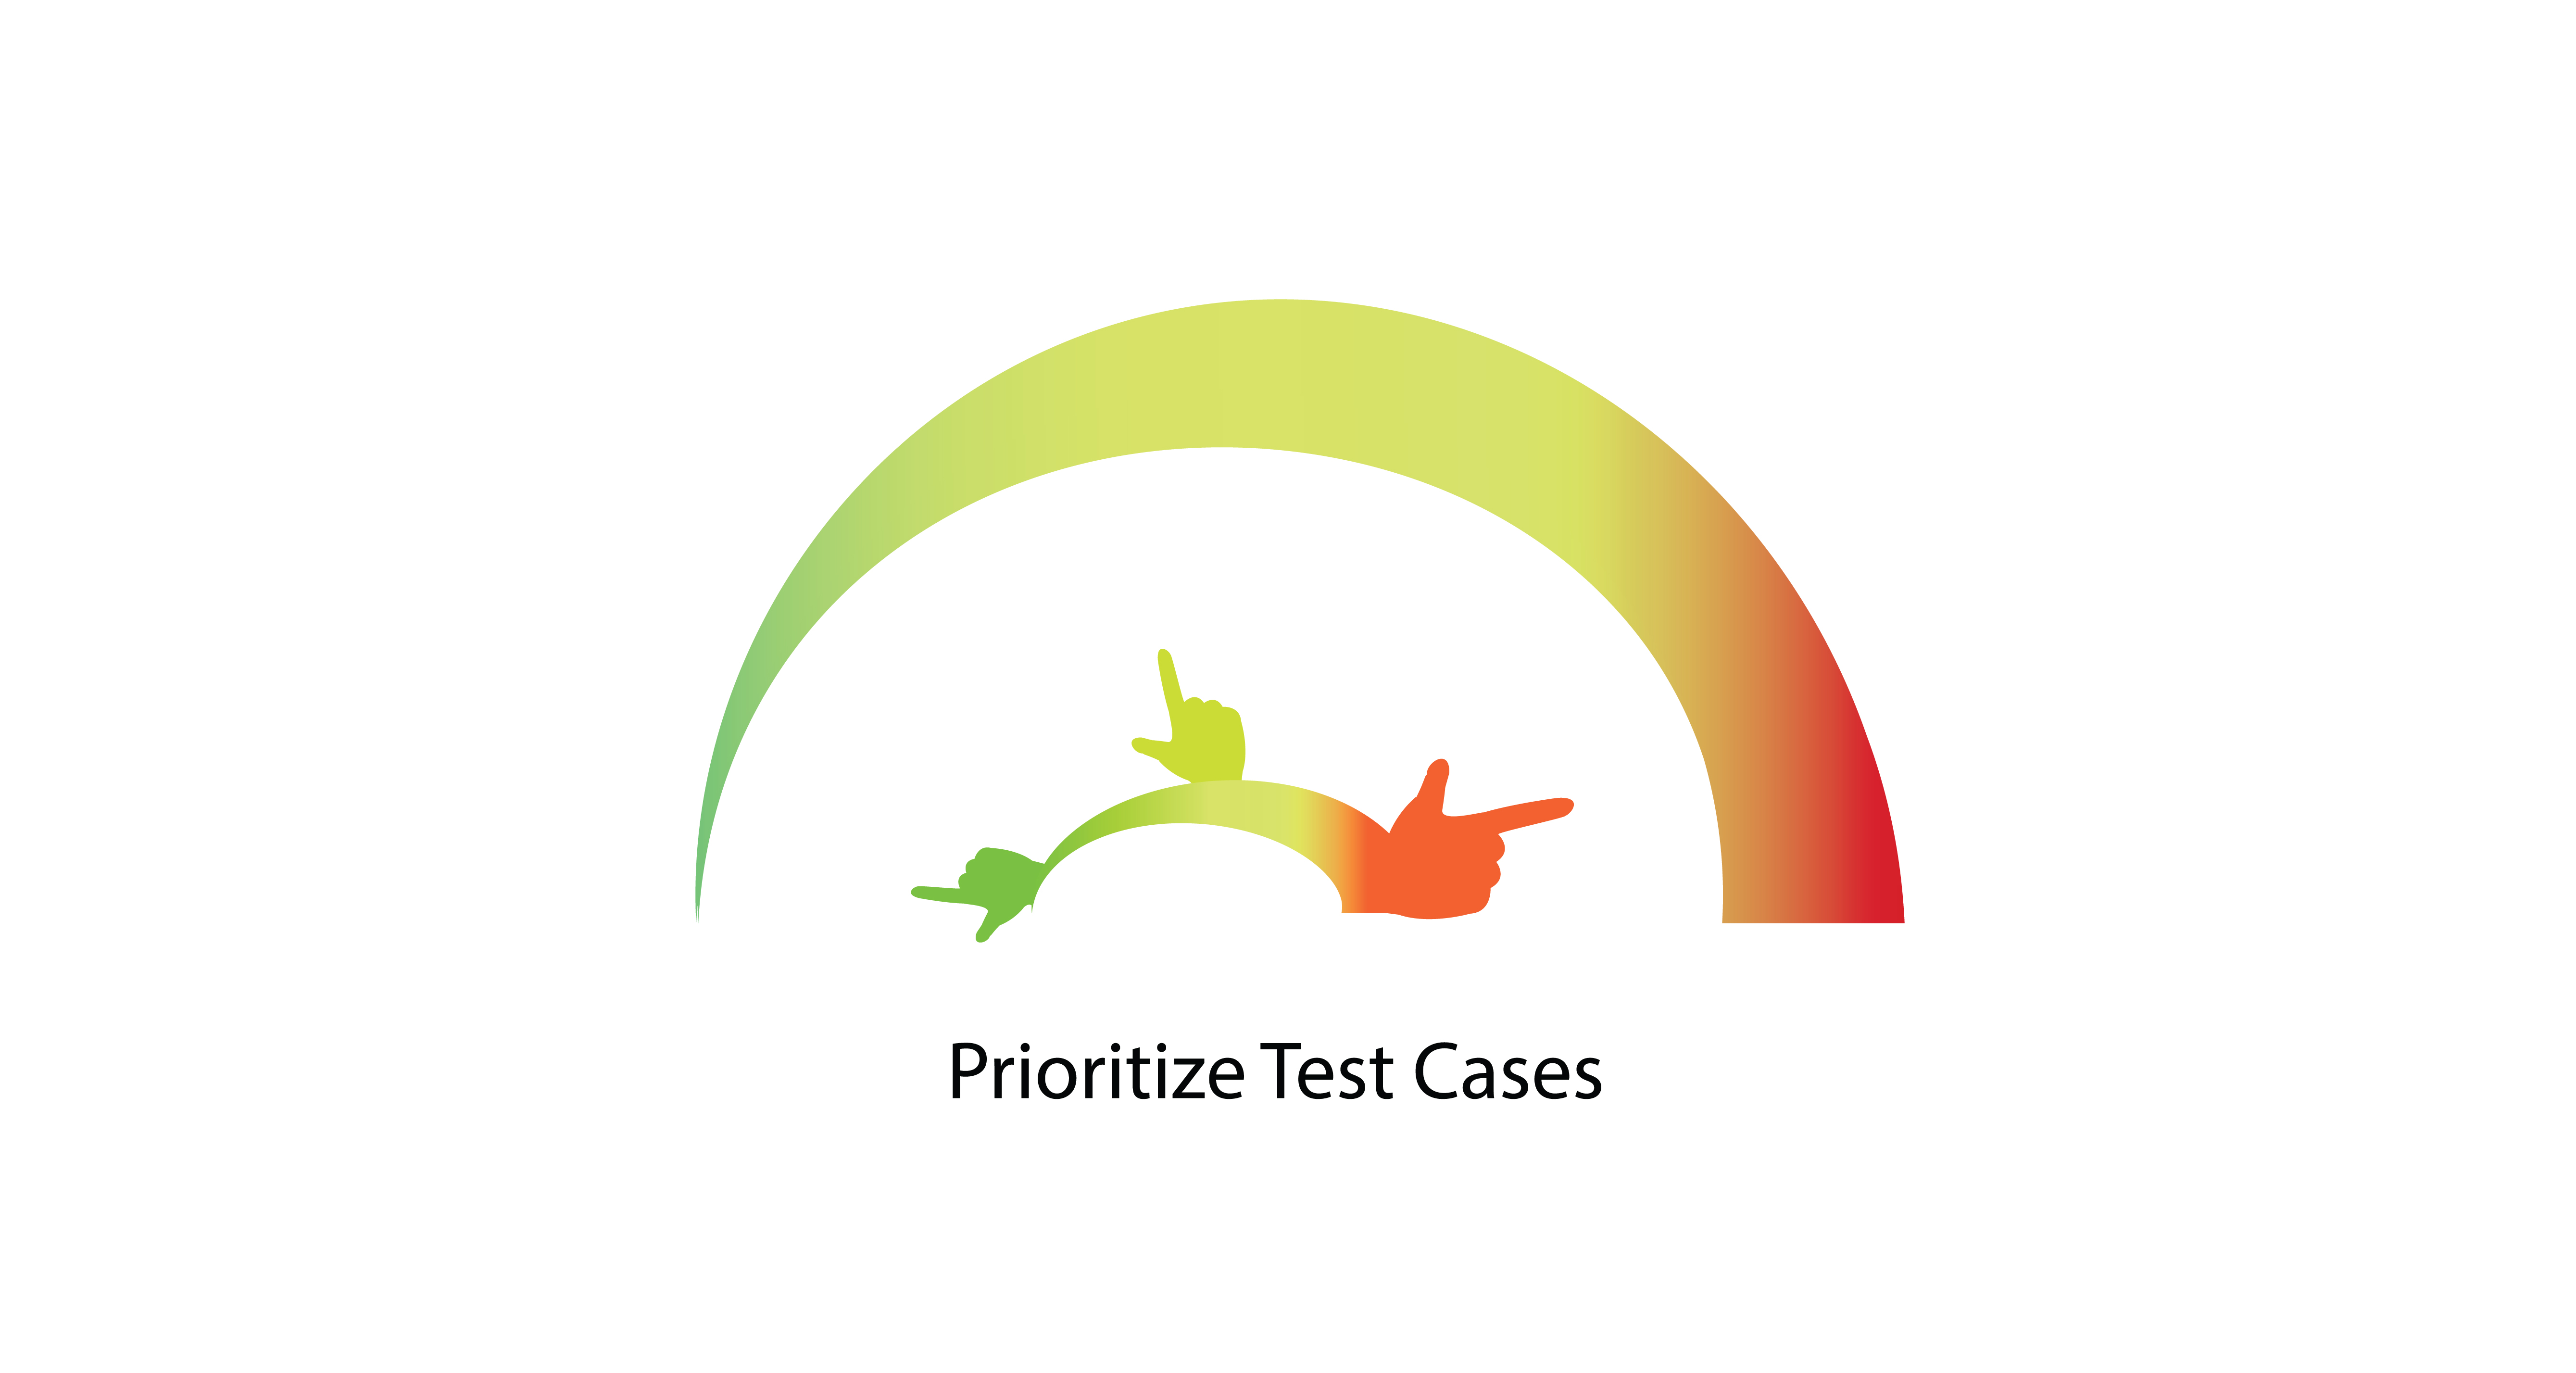 How to prioritize test cases for regression testing